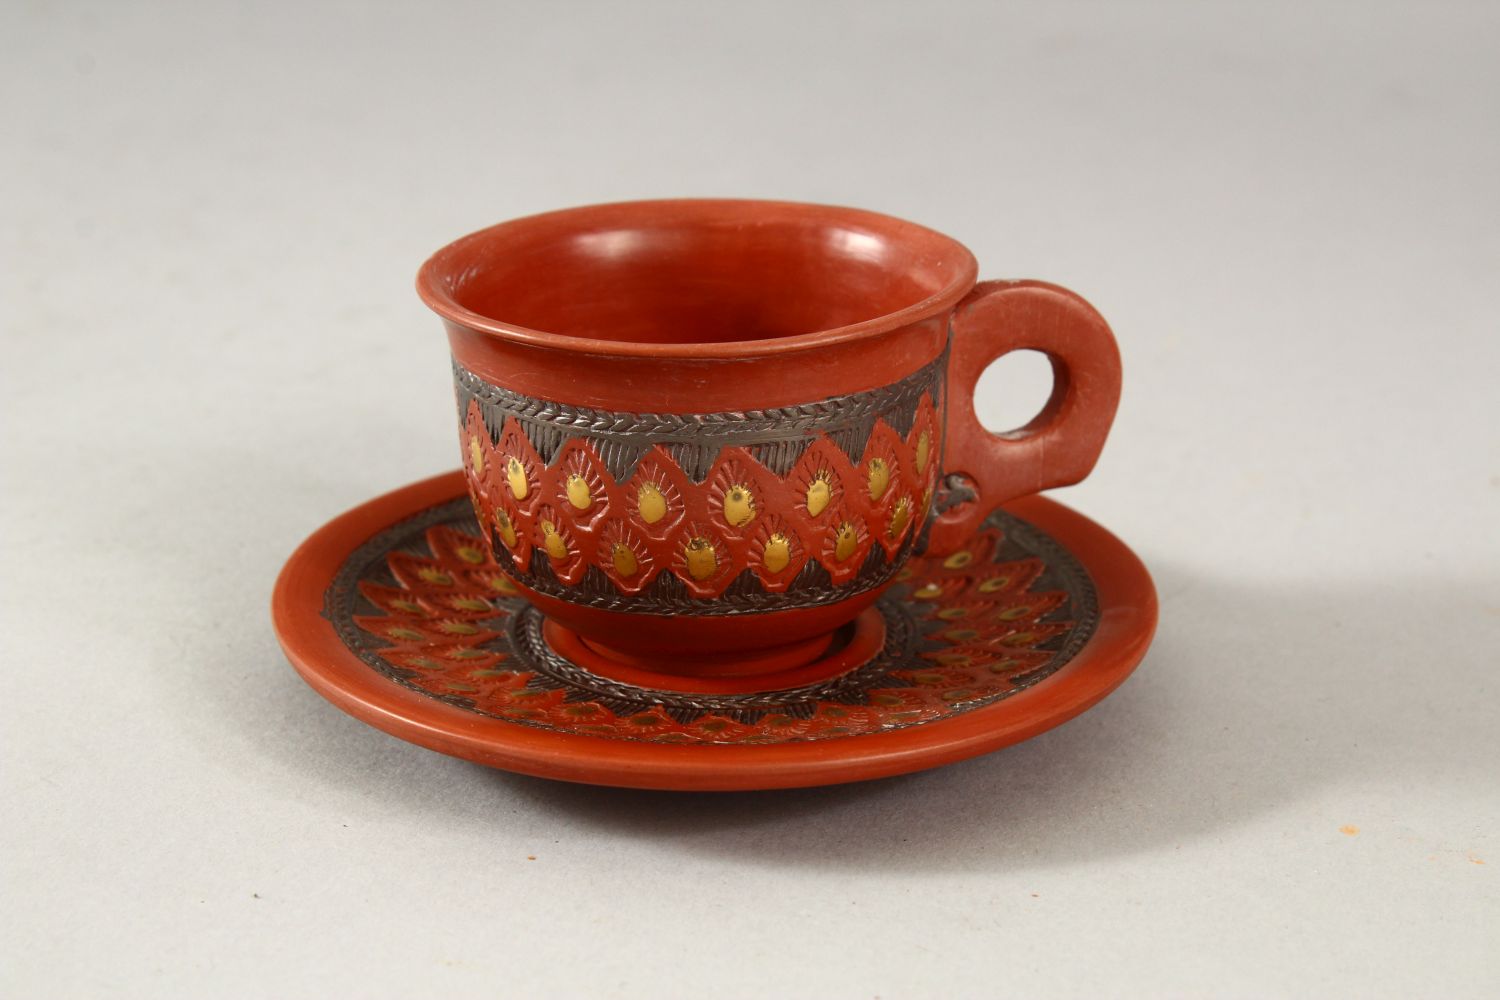 A MIXED LOT OF TURKISH TOPHANE POTTERY - comprising 2 x cup & saucers plus 3 x pipes. - Image 5 of 6